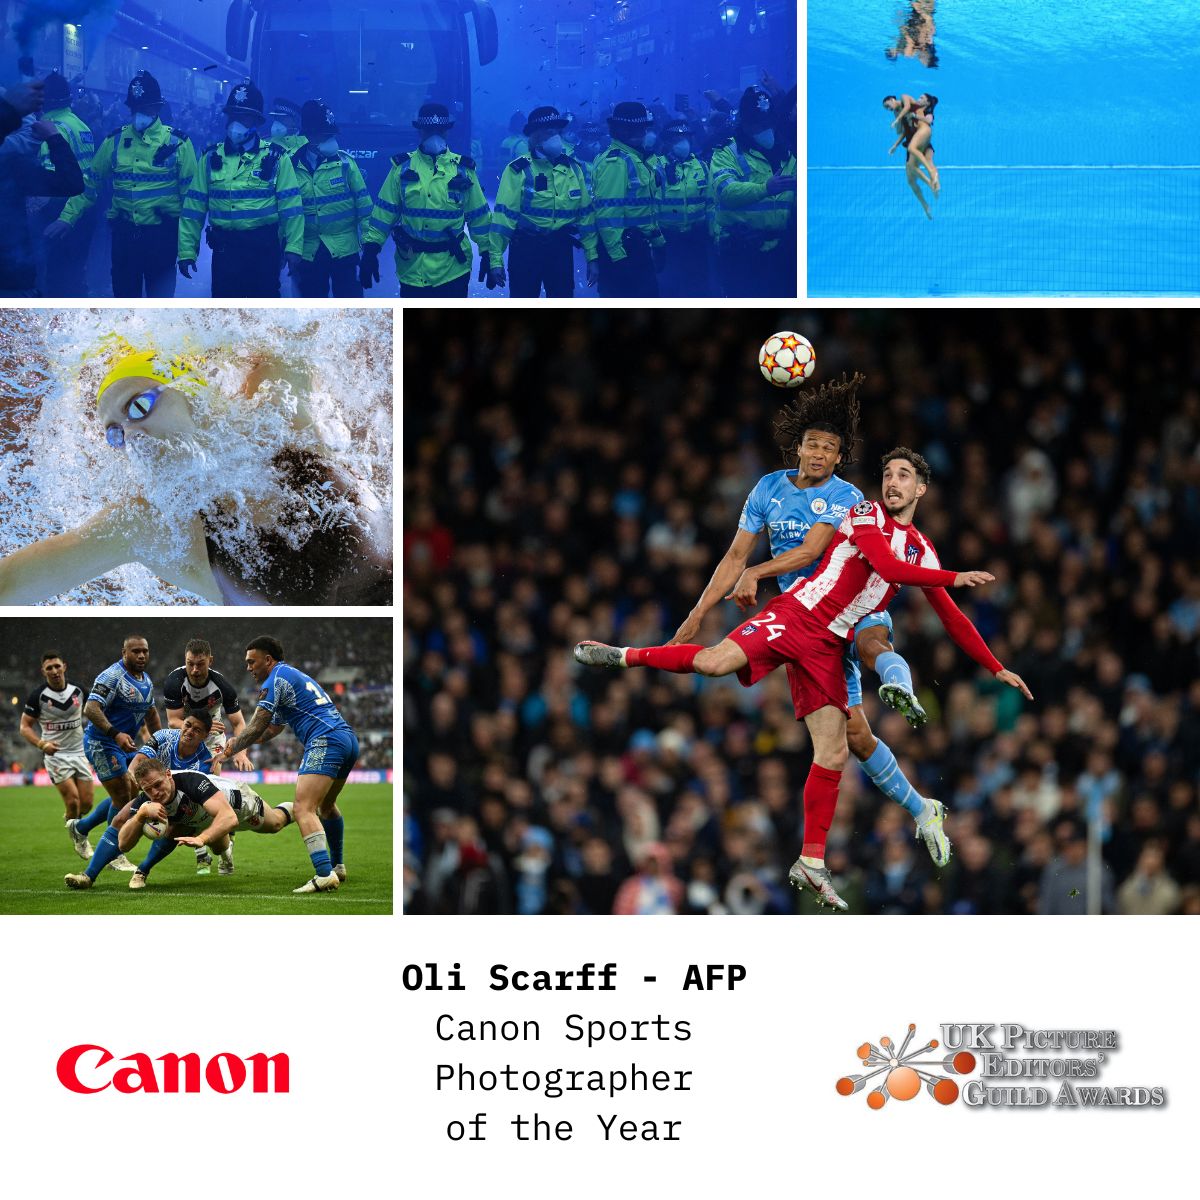 Congratulations to the very talented Oli Scarff from AFP winner of the Canon Sports Photographer of the Year at The Picture Editors Guild Awards on Monday night. Well deserved 👏 👏 👏